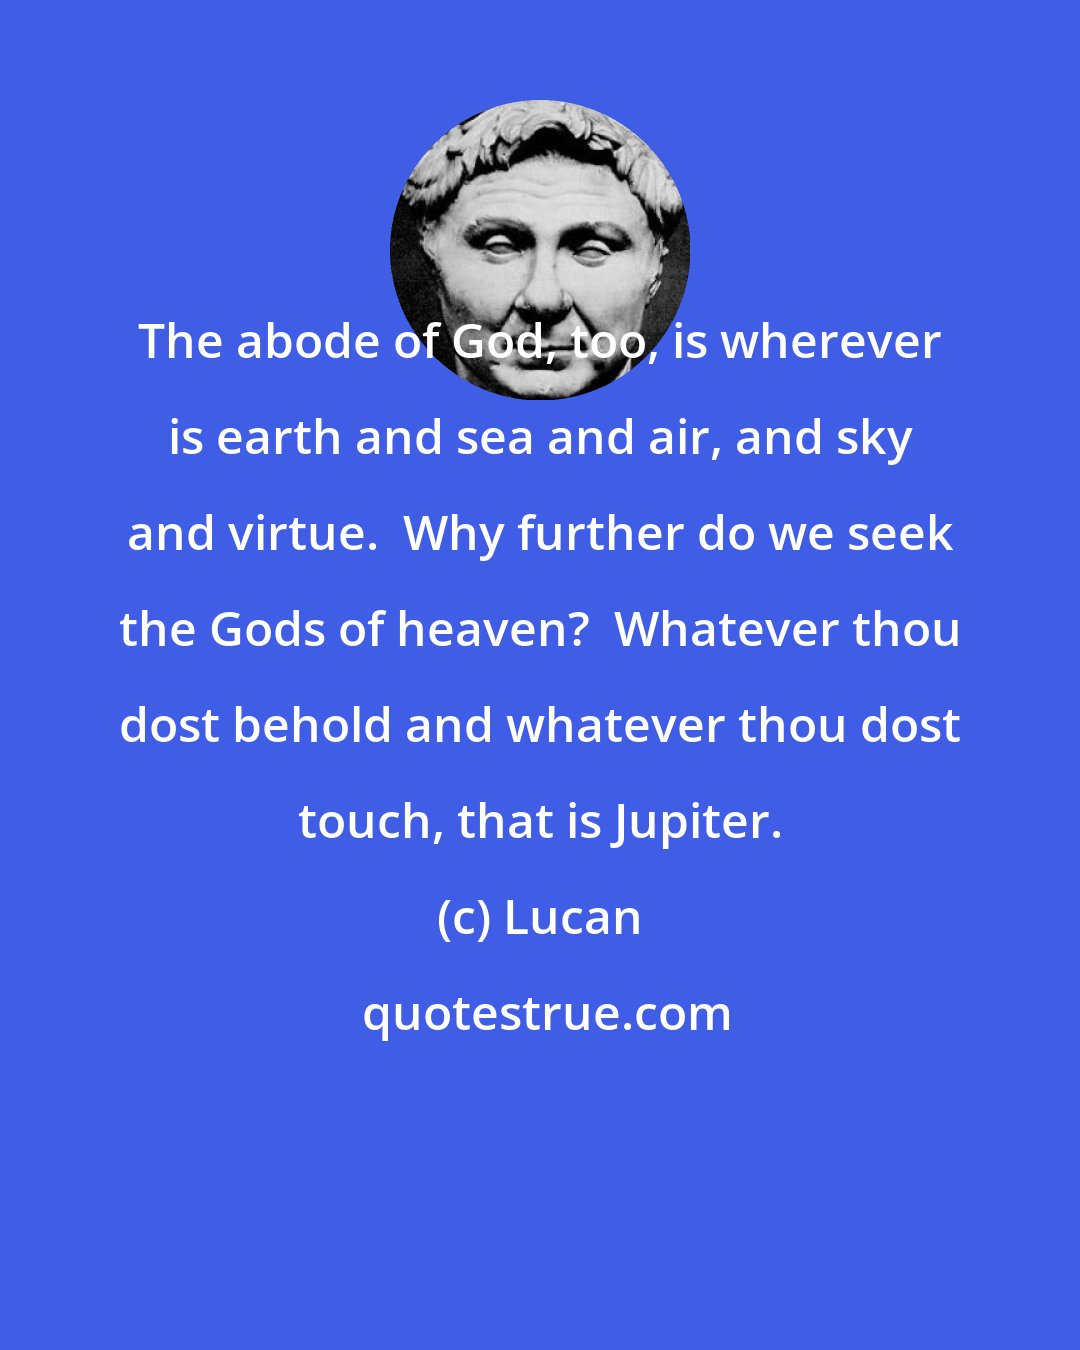 Lucan: The abode of God, too, is wherever is earth and sea and air, and sky and virtue.  Why further do we seek the Gods of heaven?  Whatever thou dost behold and whatever thou dost touch, that is Jupiter.